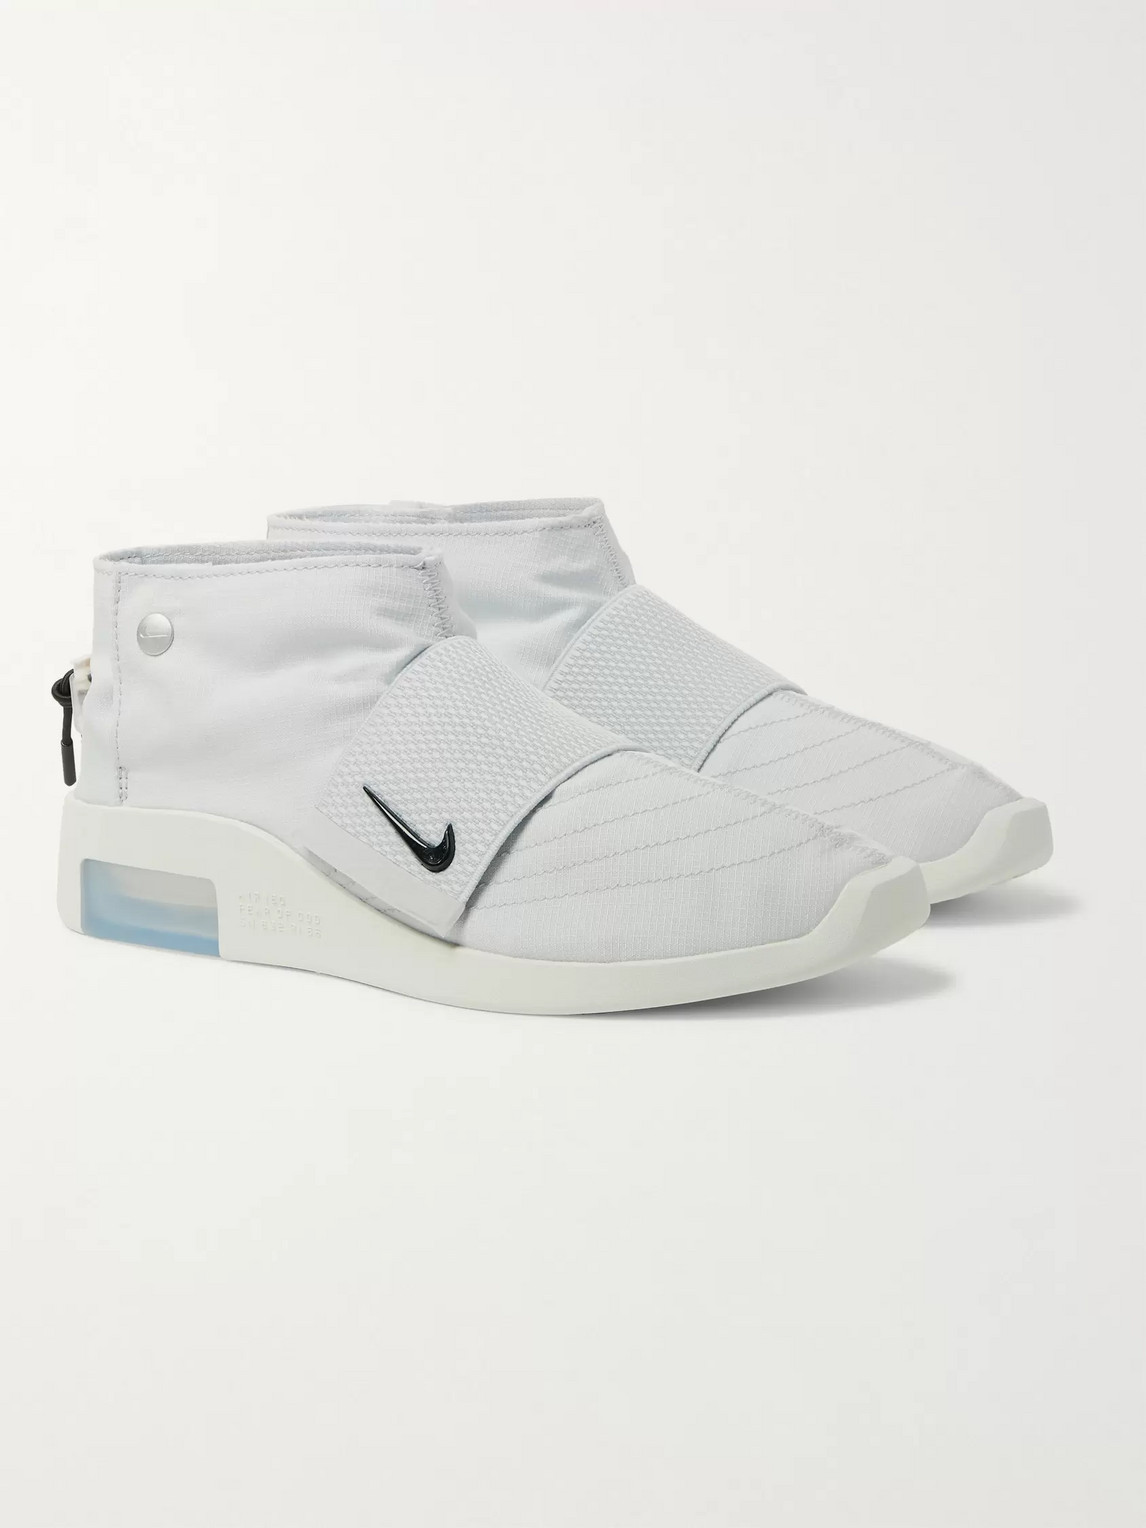 NIKE FEAR OF GOD AIR 1 MOCCASIN RIPSTOP SNEAKERS